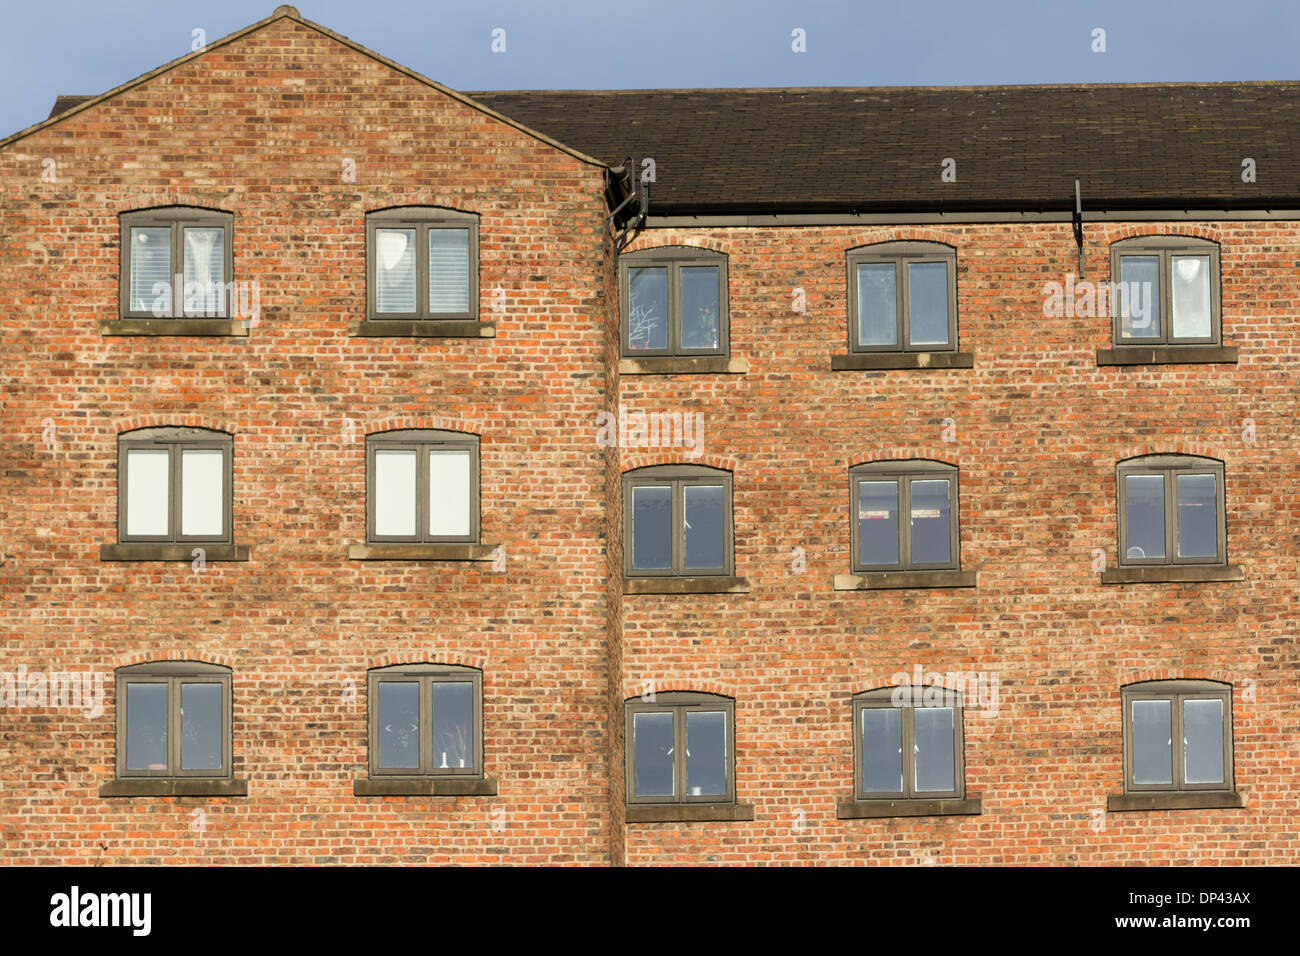 Brick wall and windows of one of the historic buildings in Newcastle Upon Tyne Stock Photo